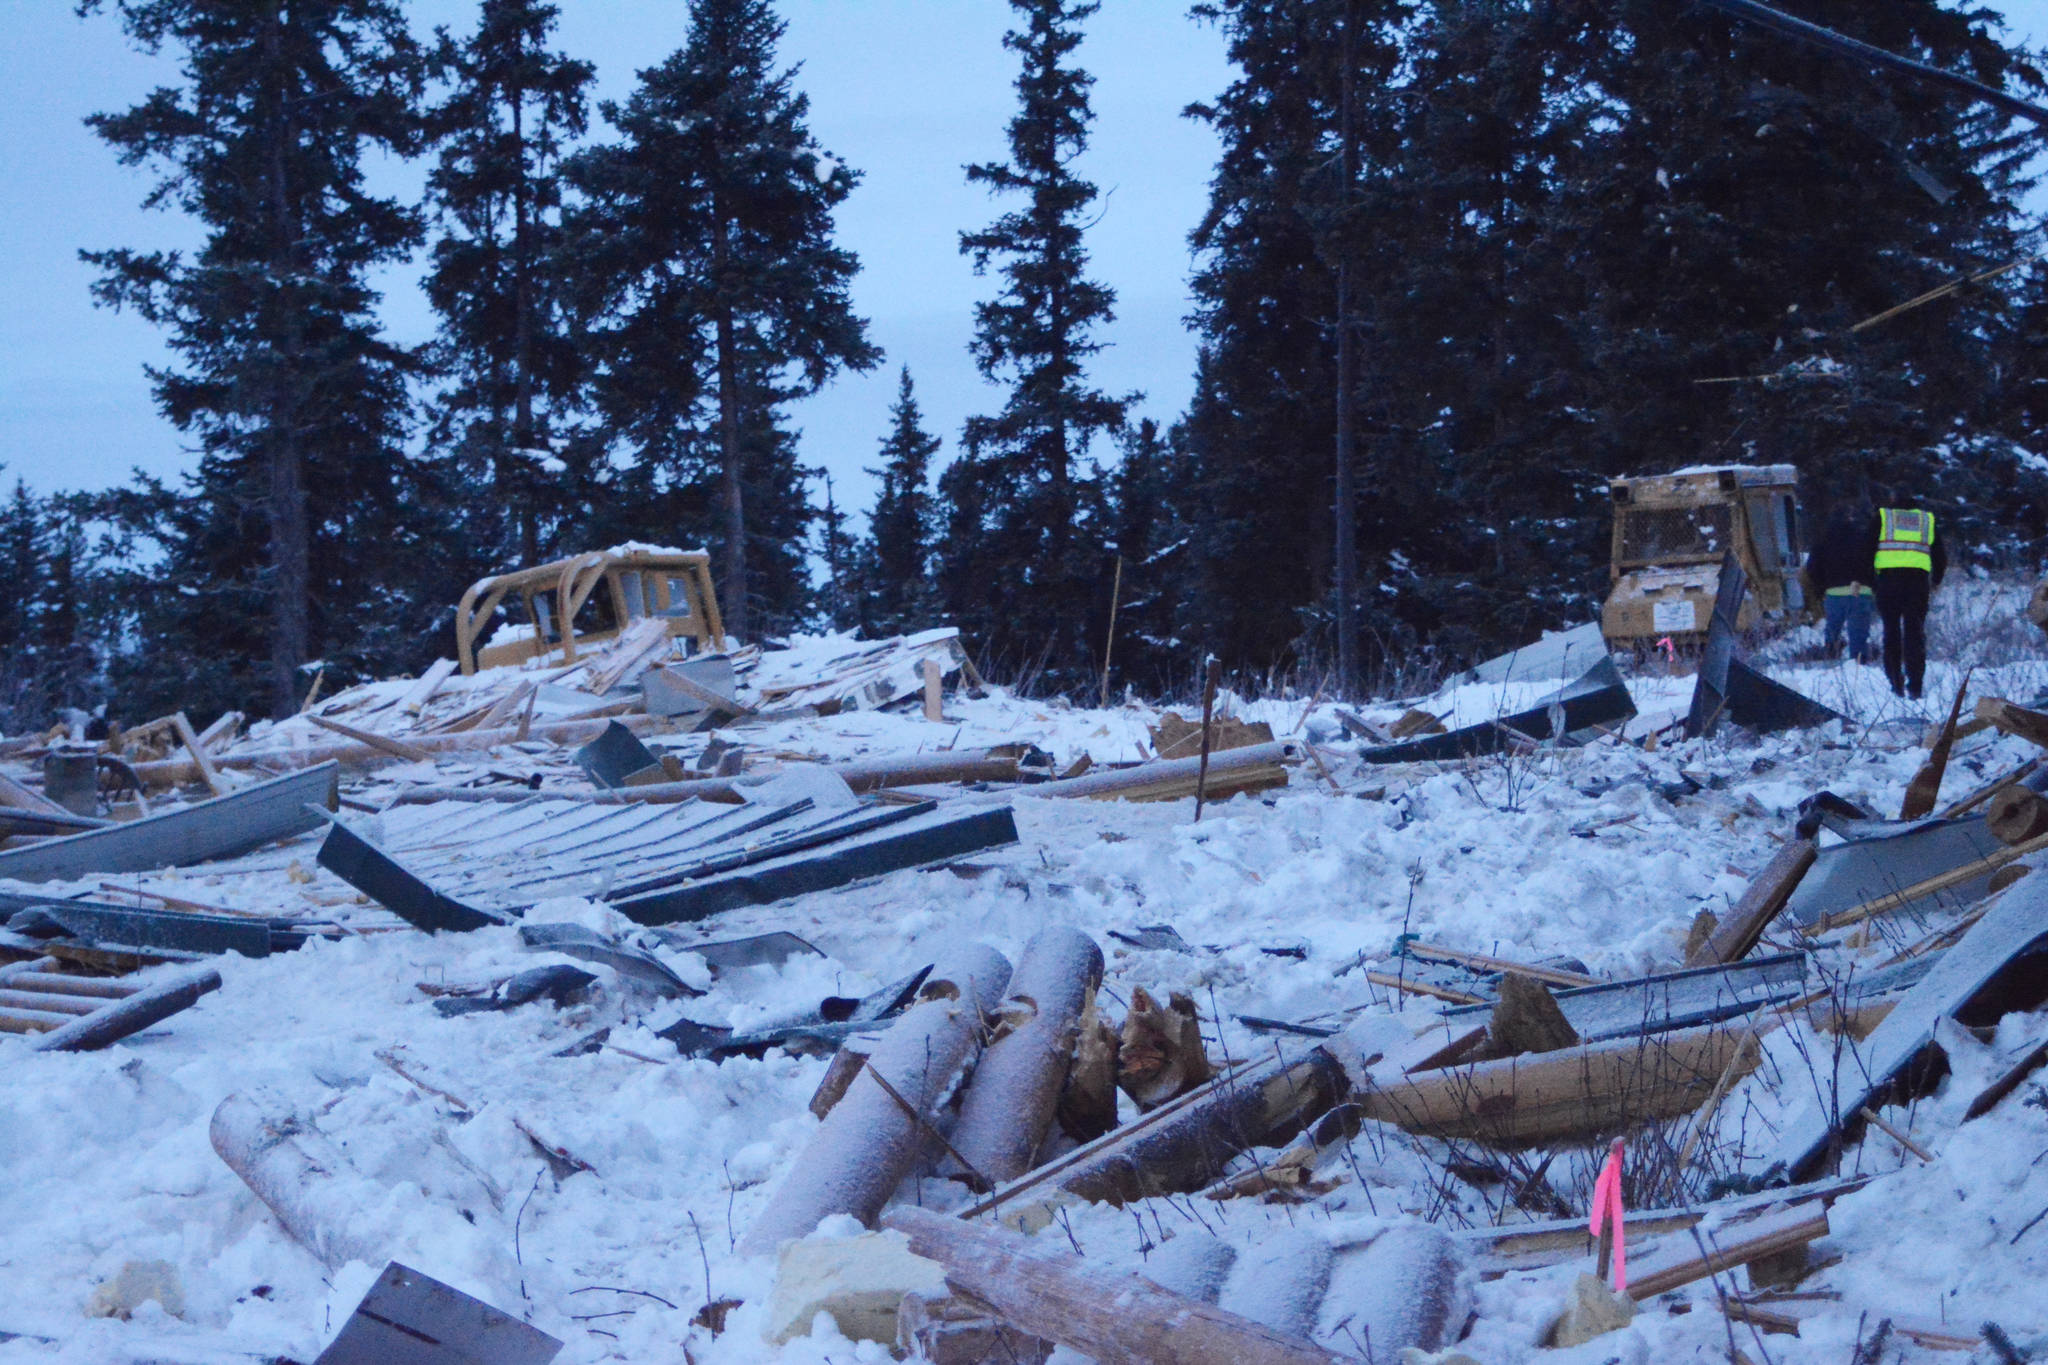 Kachemak Emergency Services Deputy Chief Joe Sallee inspects an exploded house near Mile 166 Sterling Highway on Friday, Dec. 28, 2018, near Homer, Alaska. The debris field from the explosion spread at least 200 feet in all directions. (Photo by Michael Armstrong/Homer News).